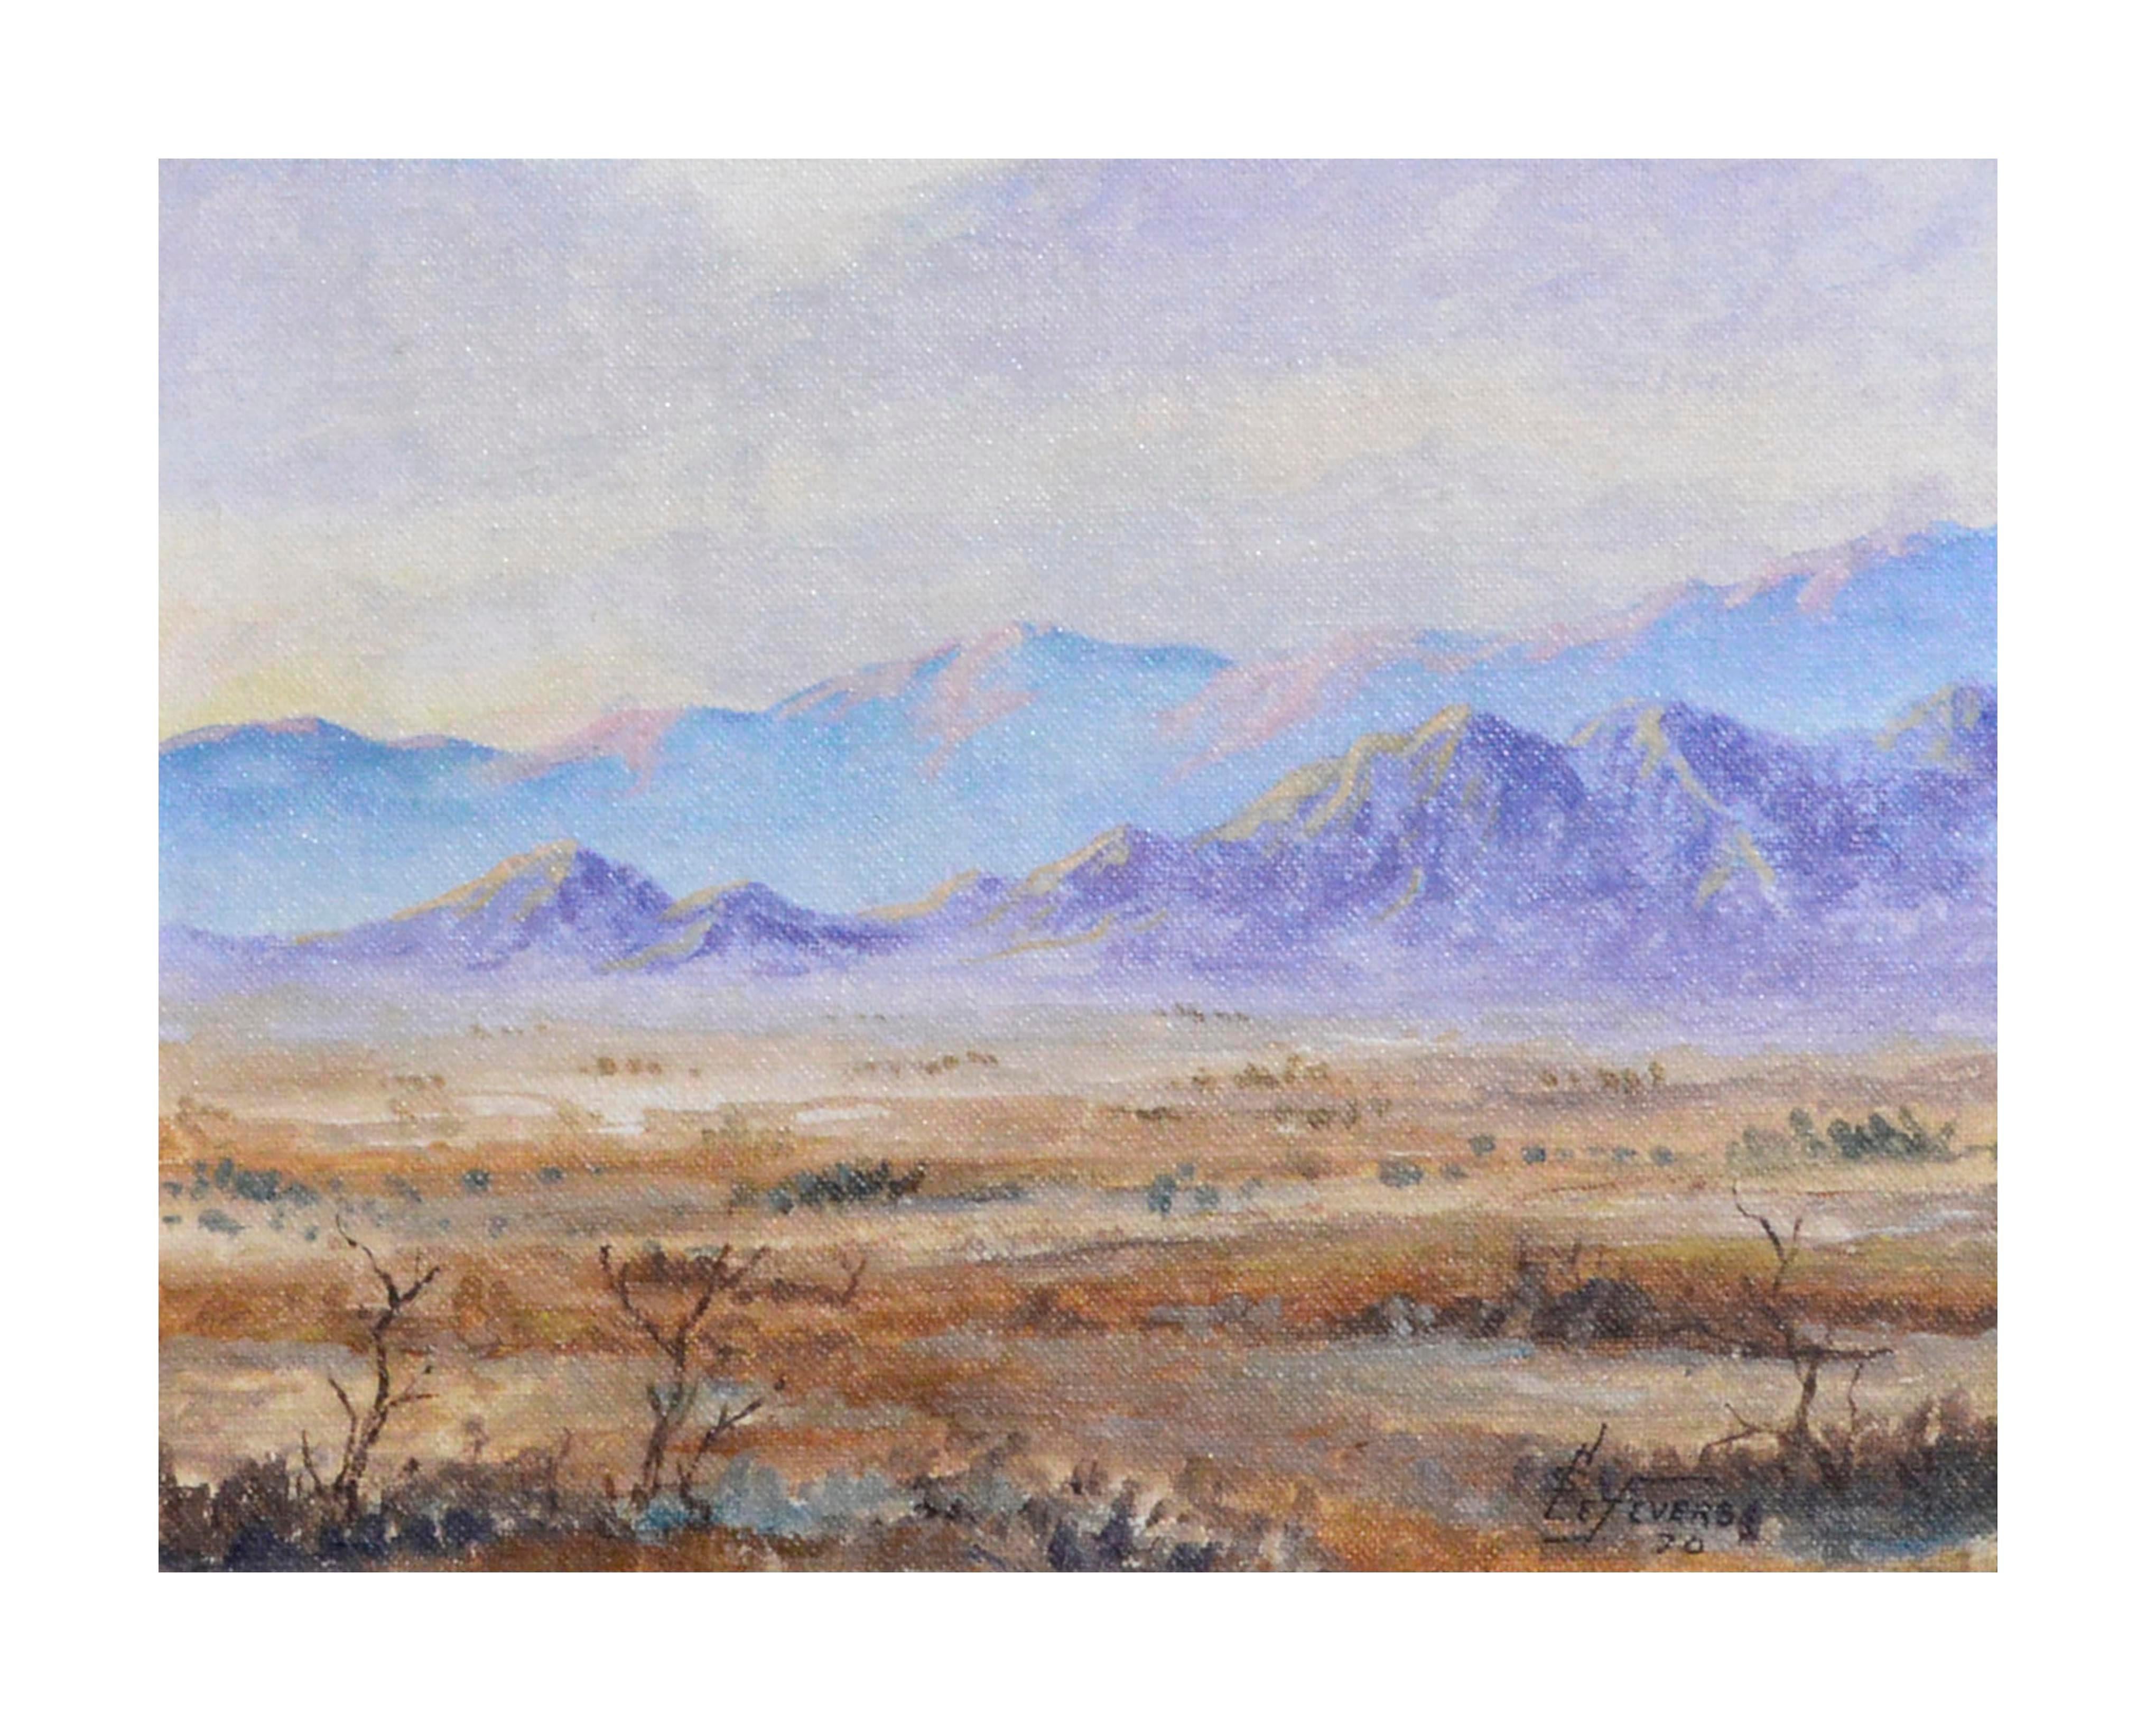 Palm Springs Desert Landscape  - Painting by H.S. Lefevers